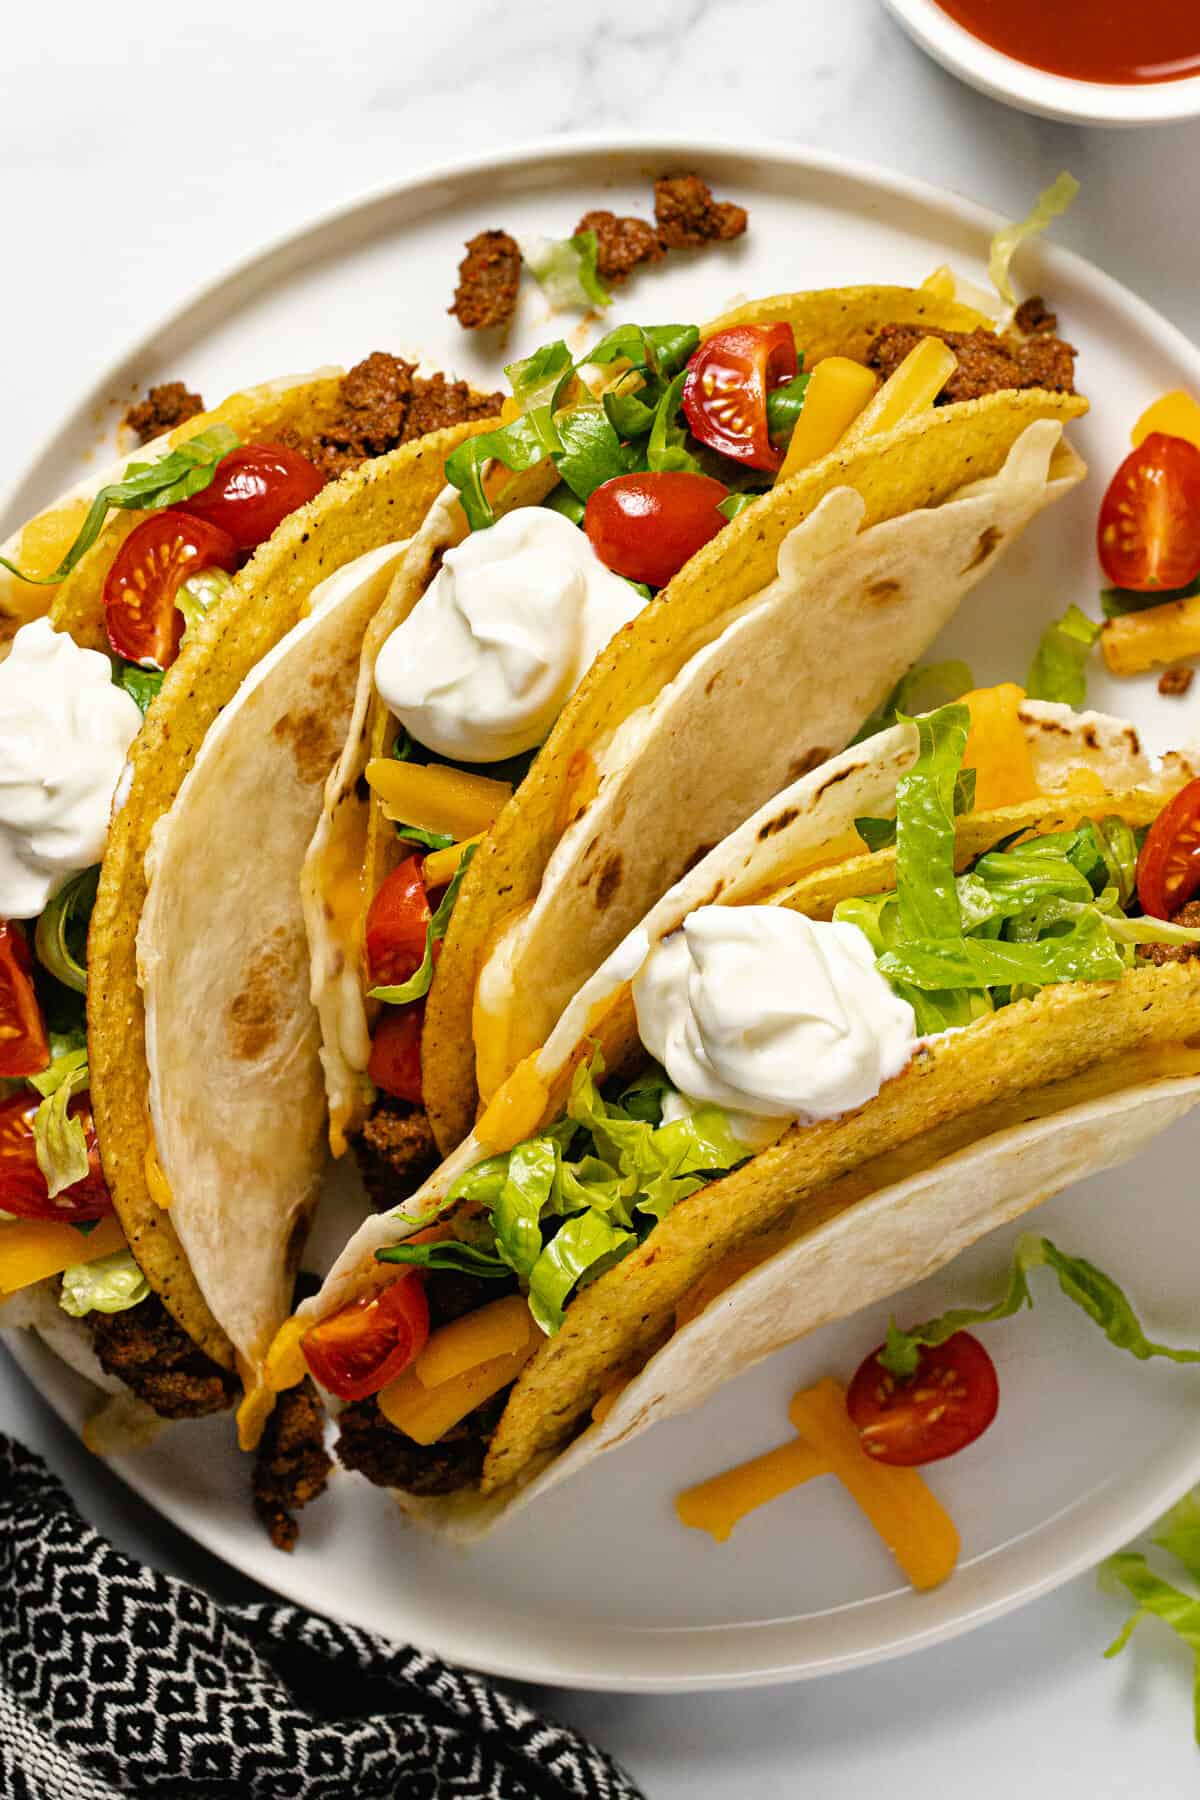 Three cheesy gordita crunch tacos on a white plate topped with sour cream